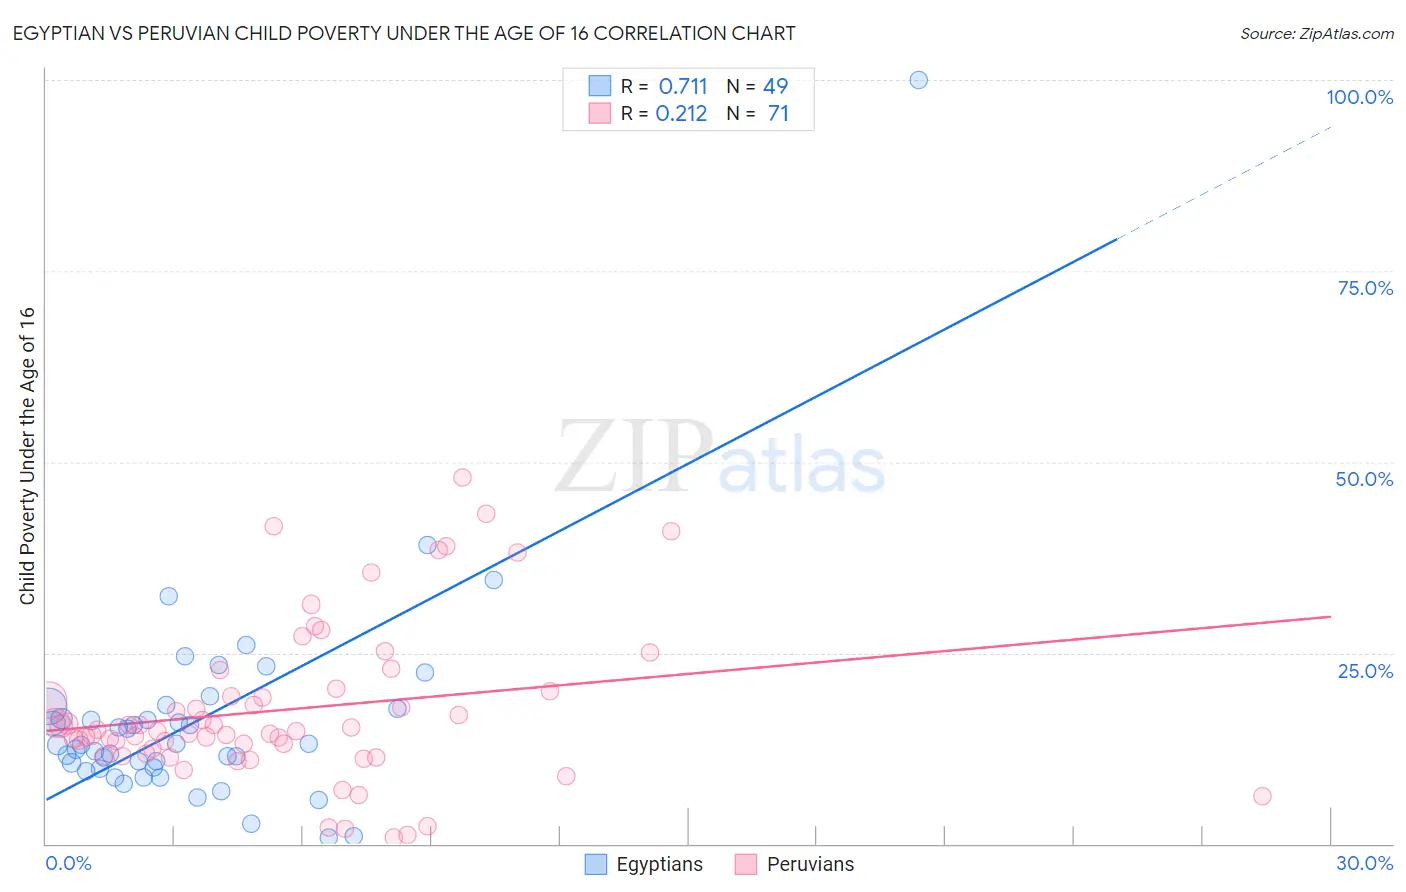 Egyptian vs Peruvian Child Poverty Under the Age of 16